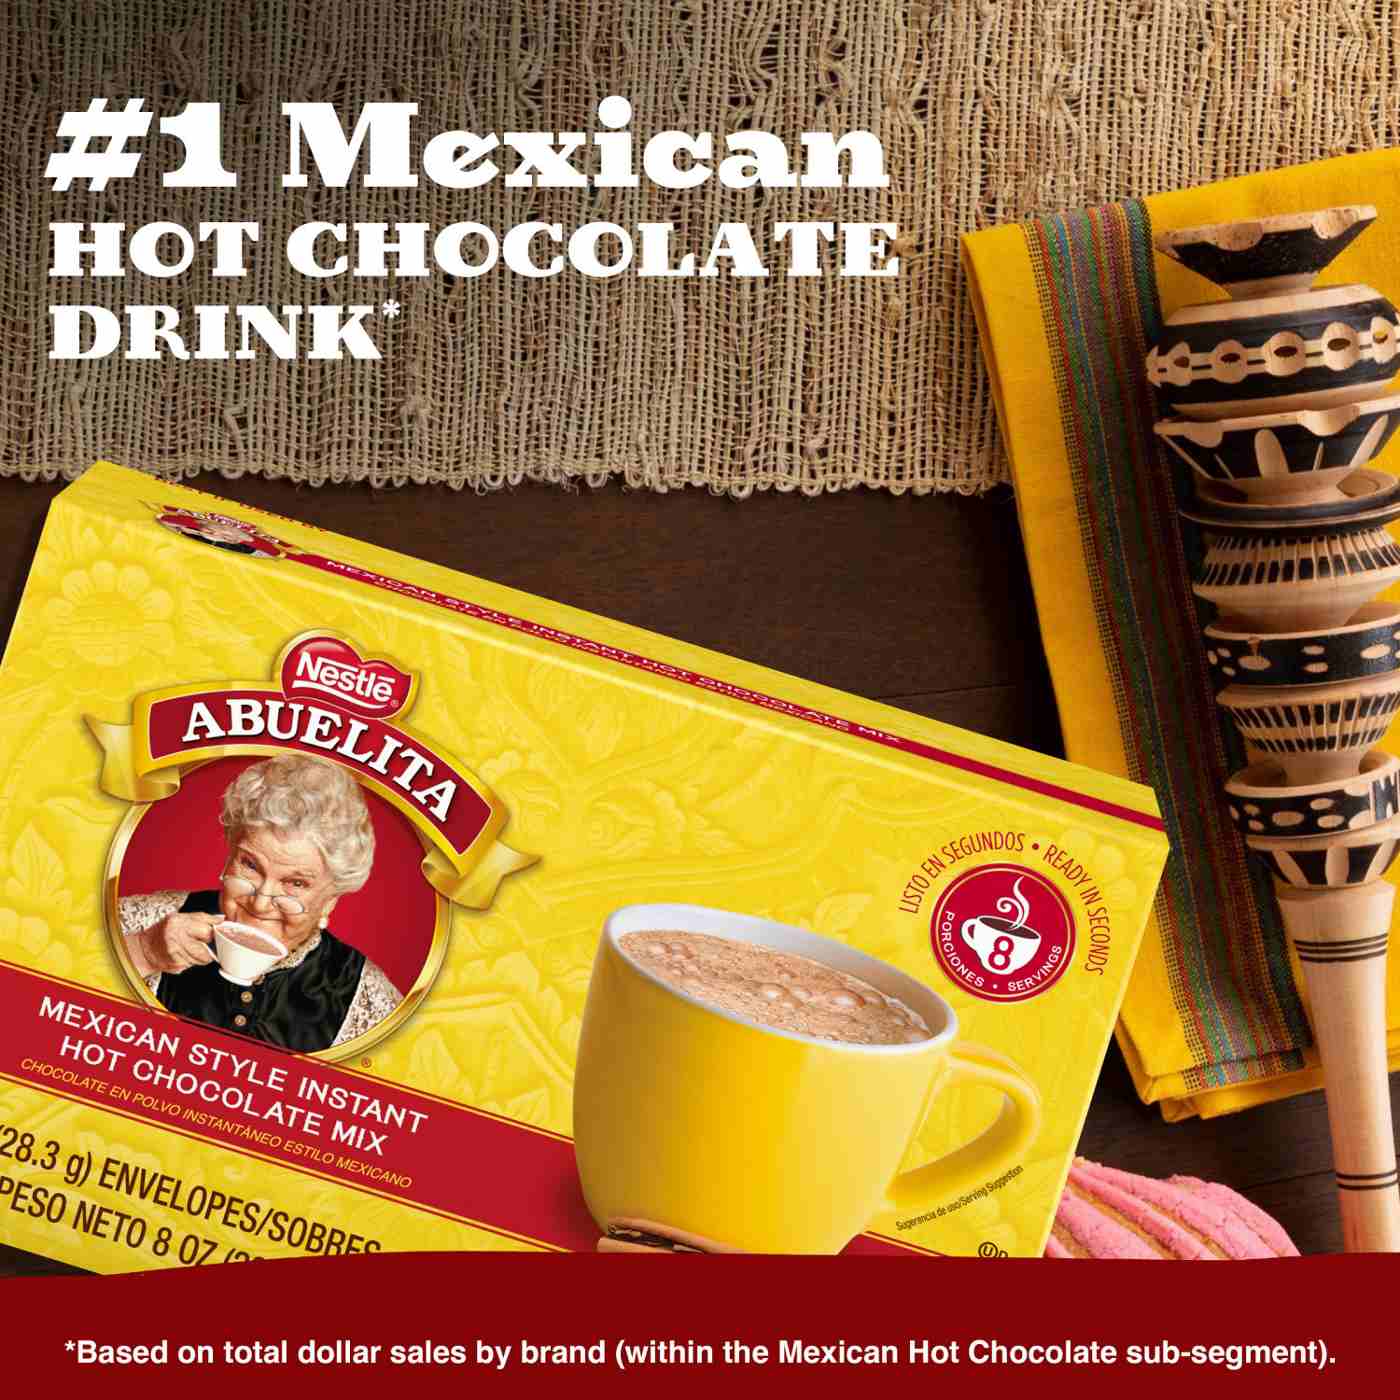 Nestle Abuelita Mexican Style Instant Hot Chocolate Drink Mix; image 6 of 8